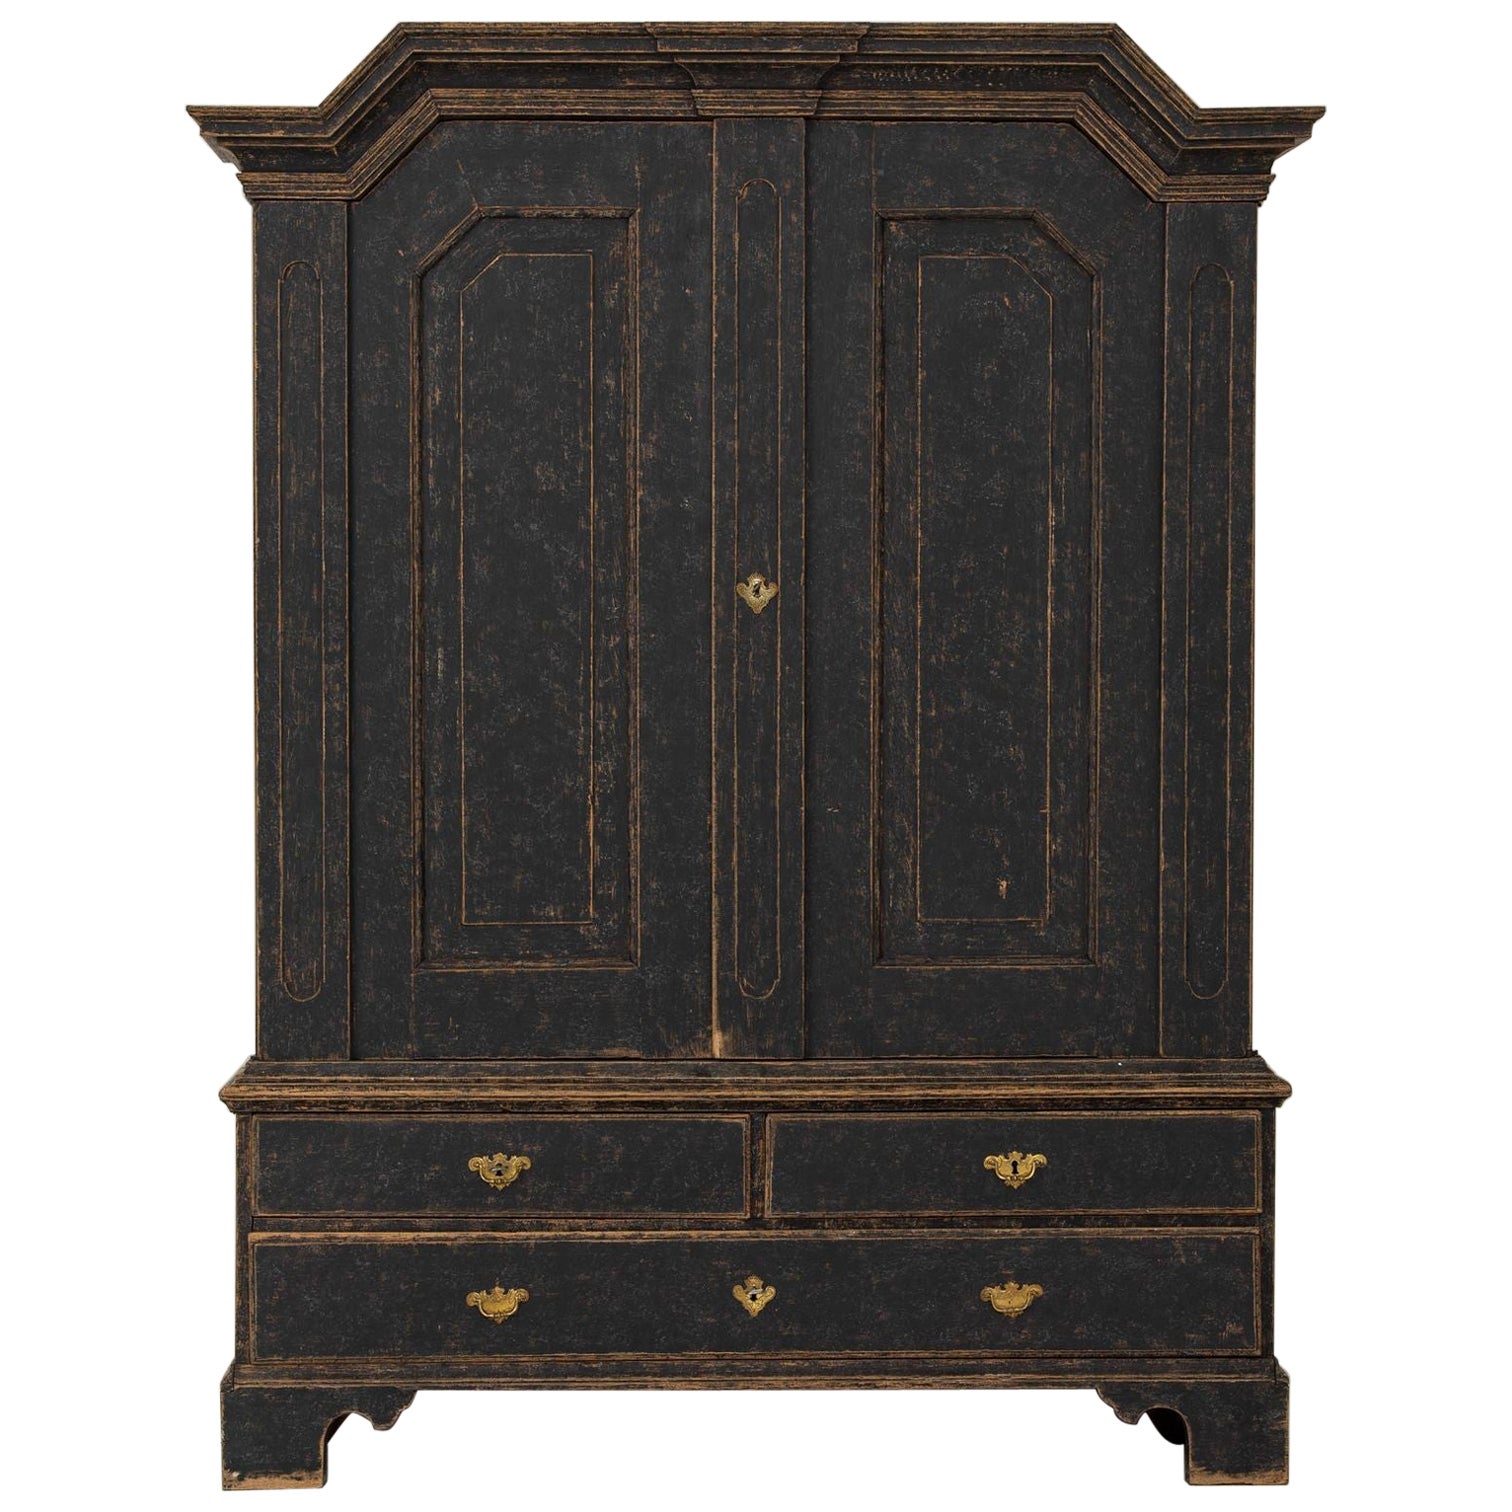 18th c. Swedish Baroque Period Painted Linen Press Cabinet